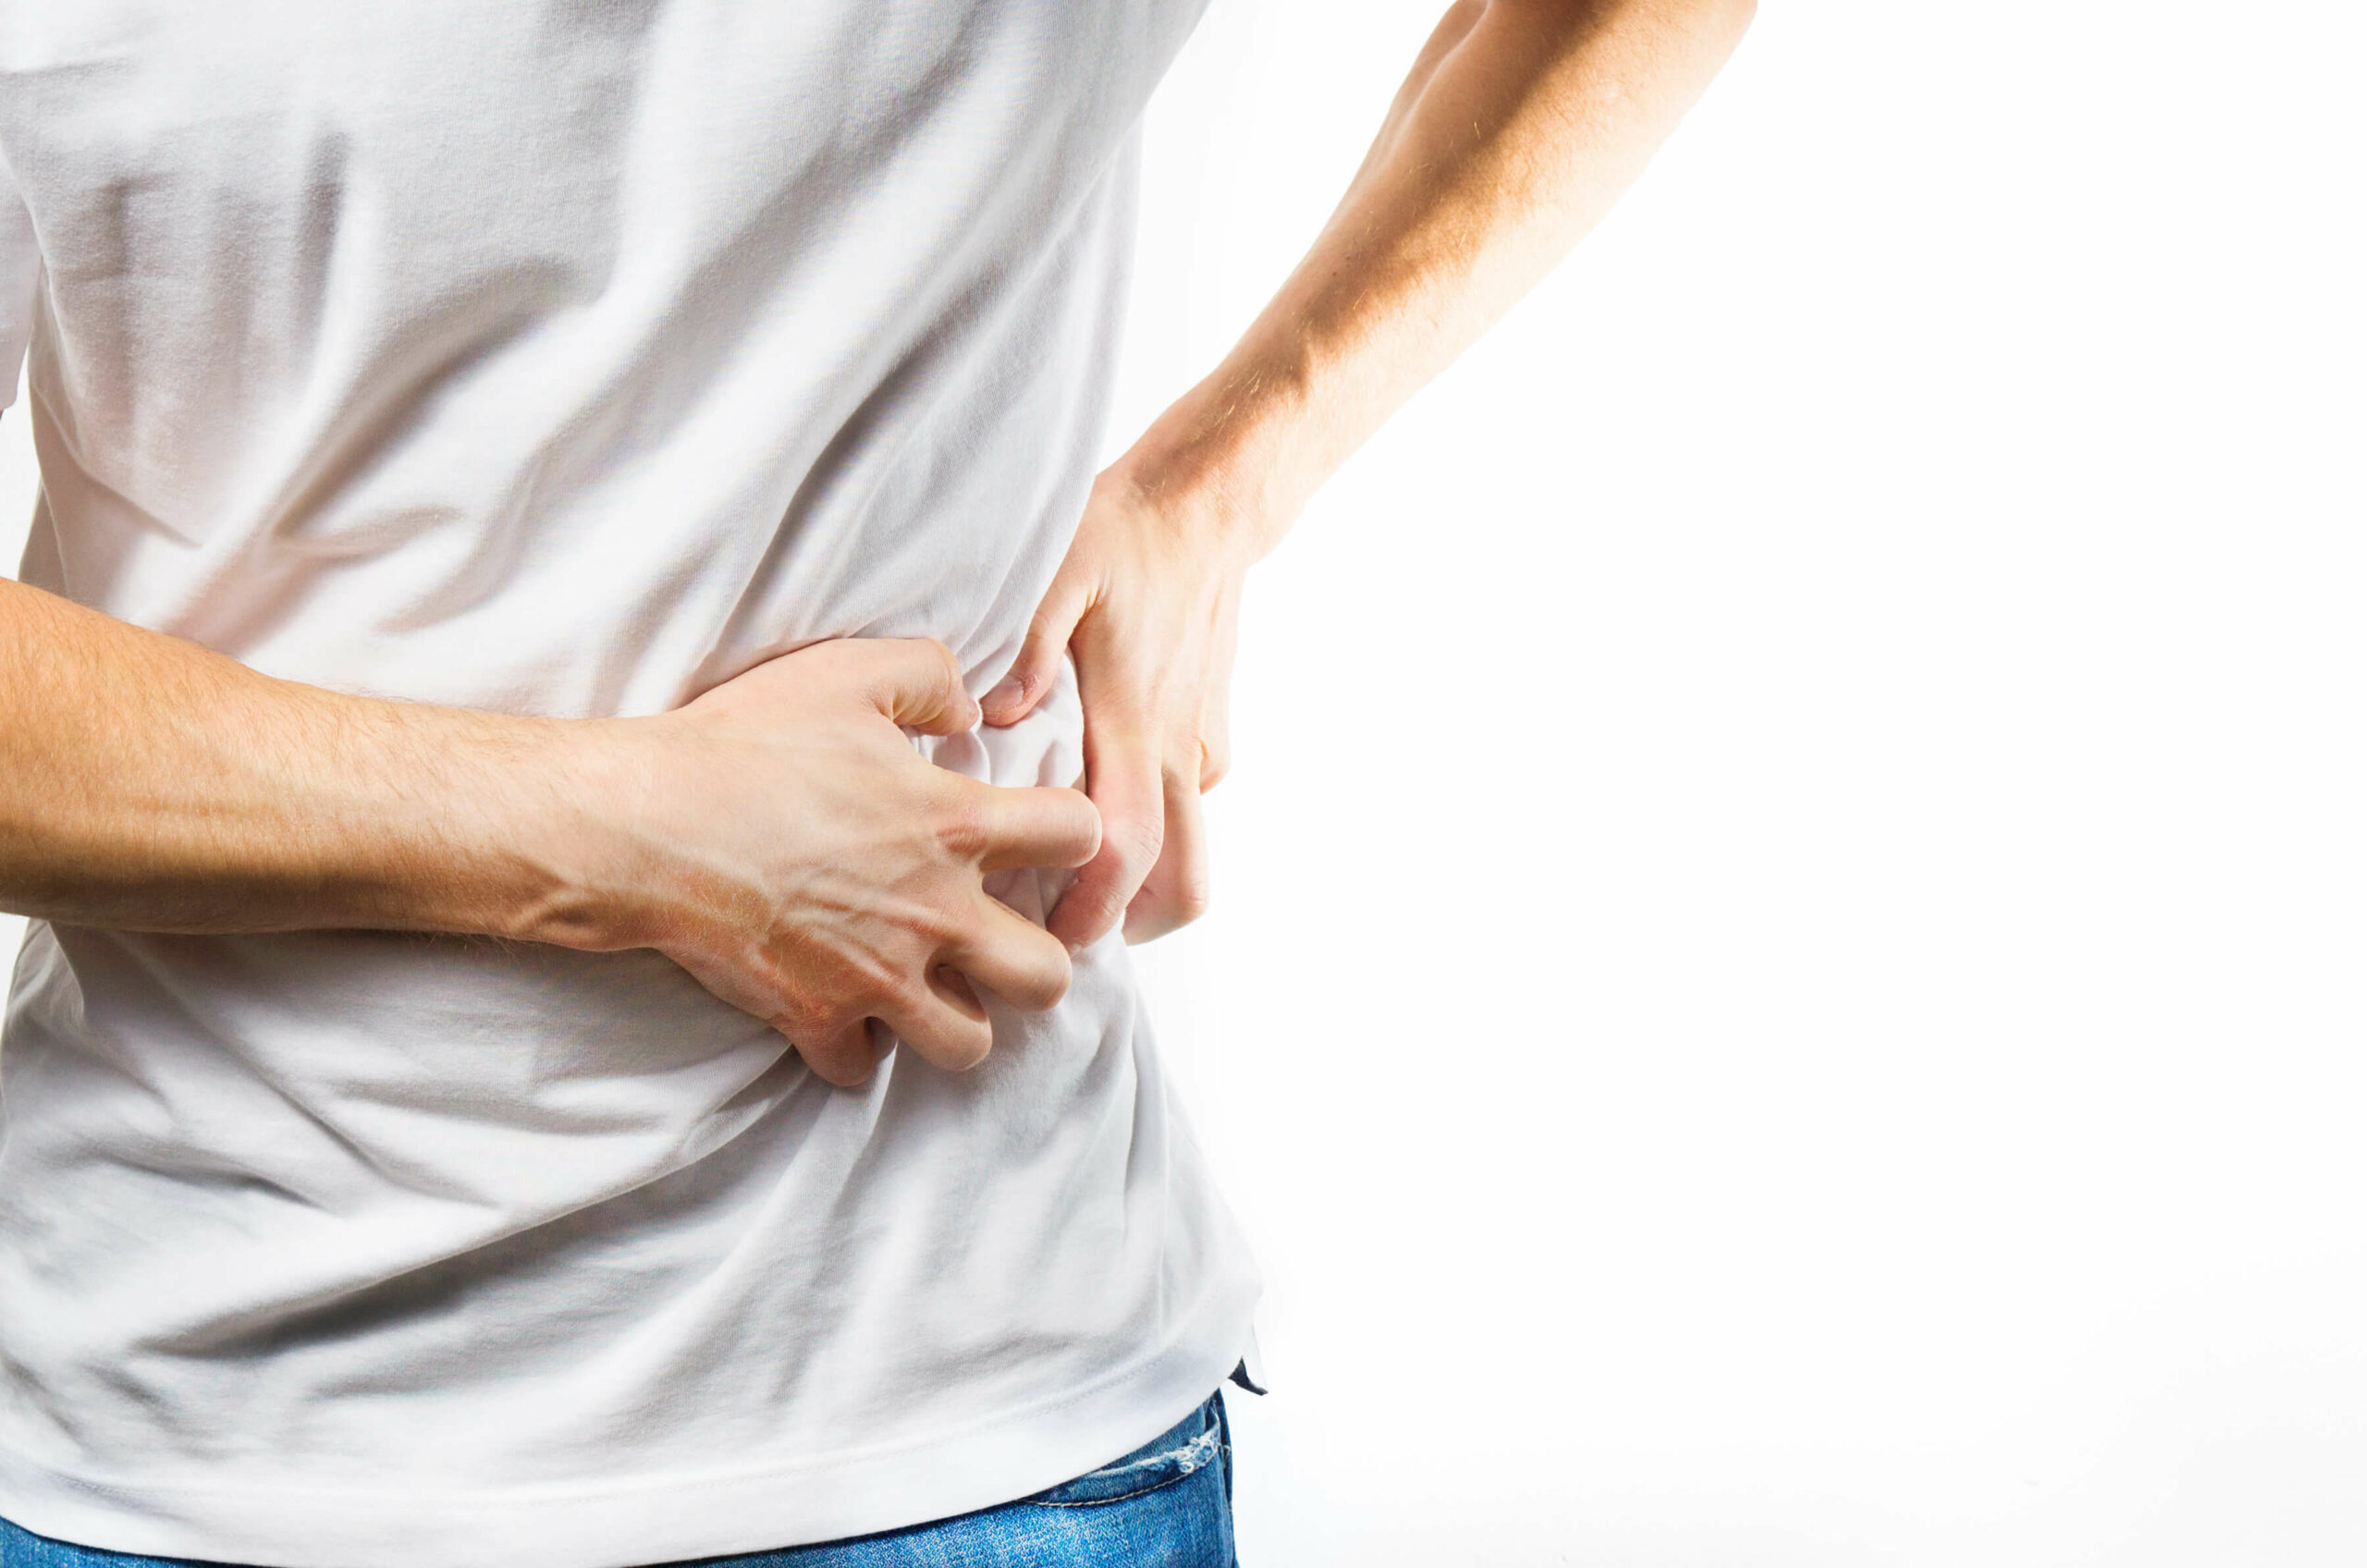 How can you prevent kidney stones? Check out these 3 practical ways